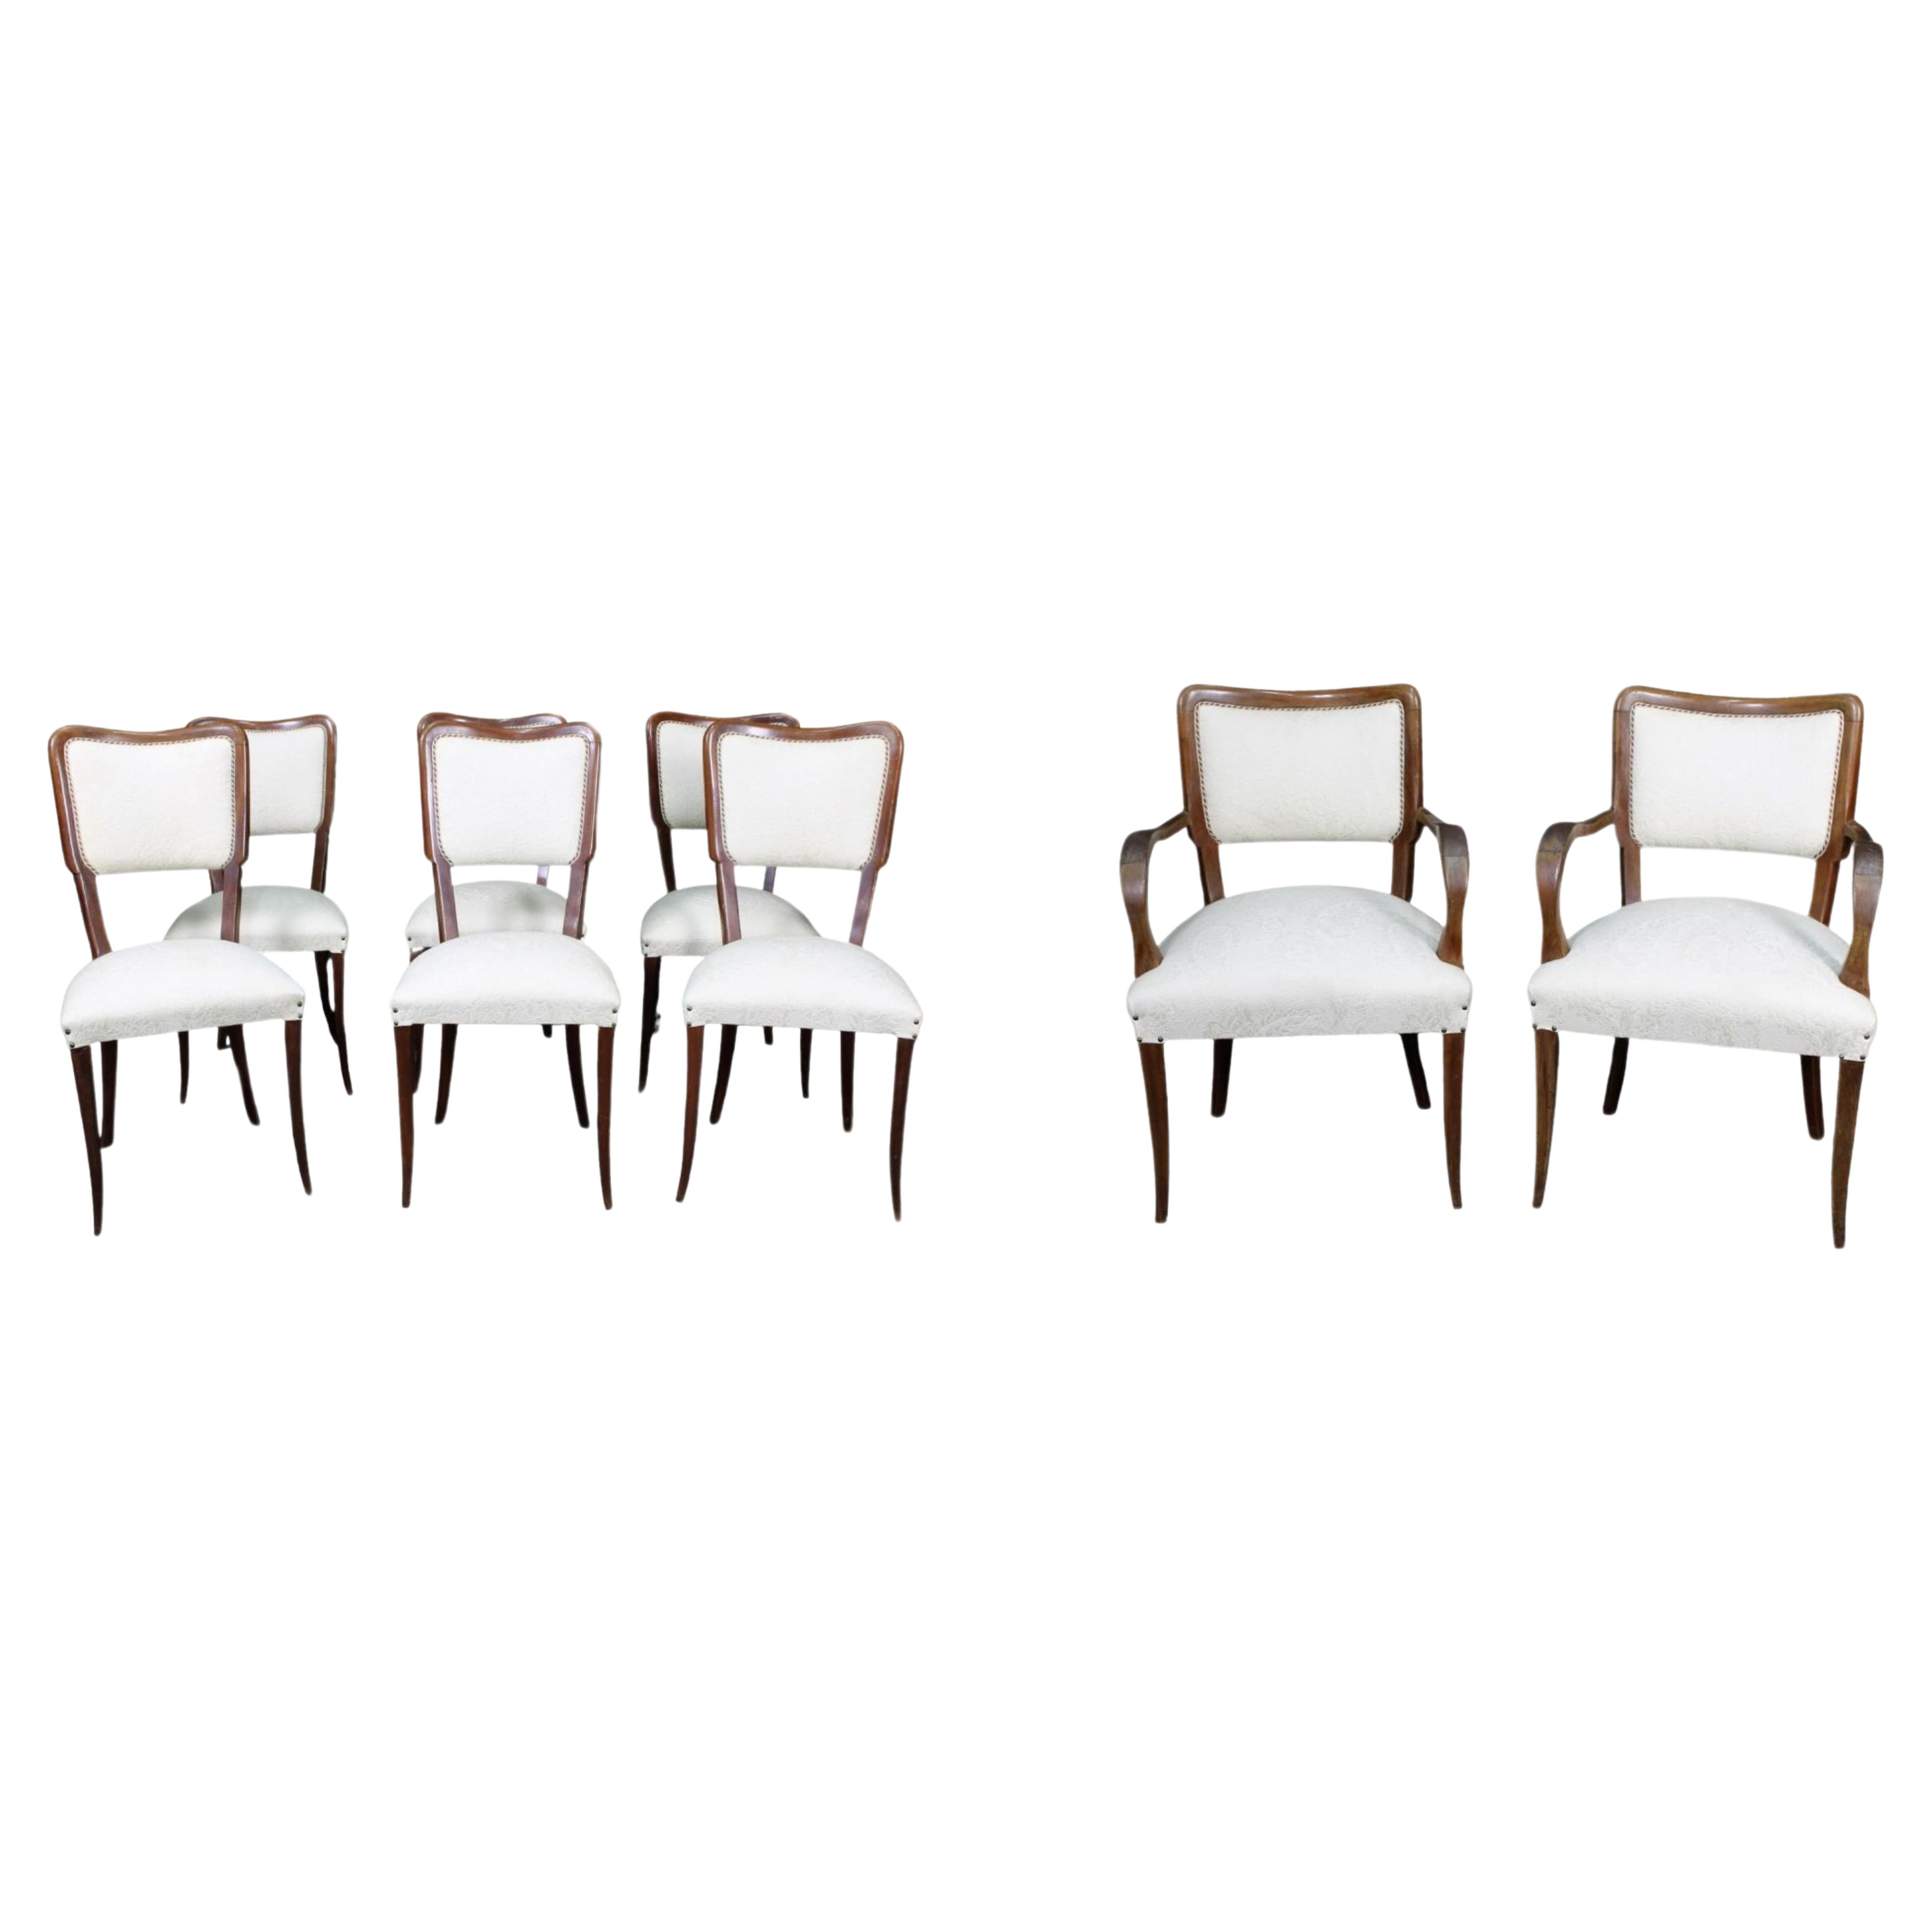 Six Chairs with a Pair of 20th Century Italian Armchairs For Sale